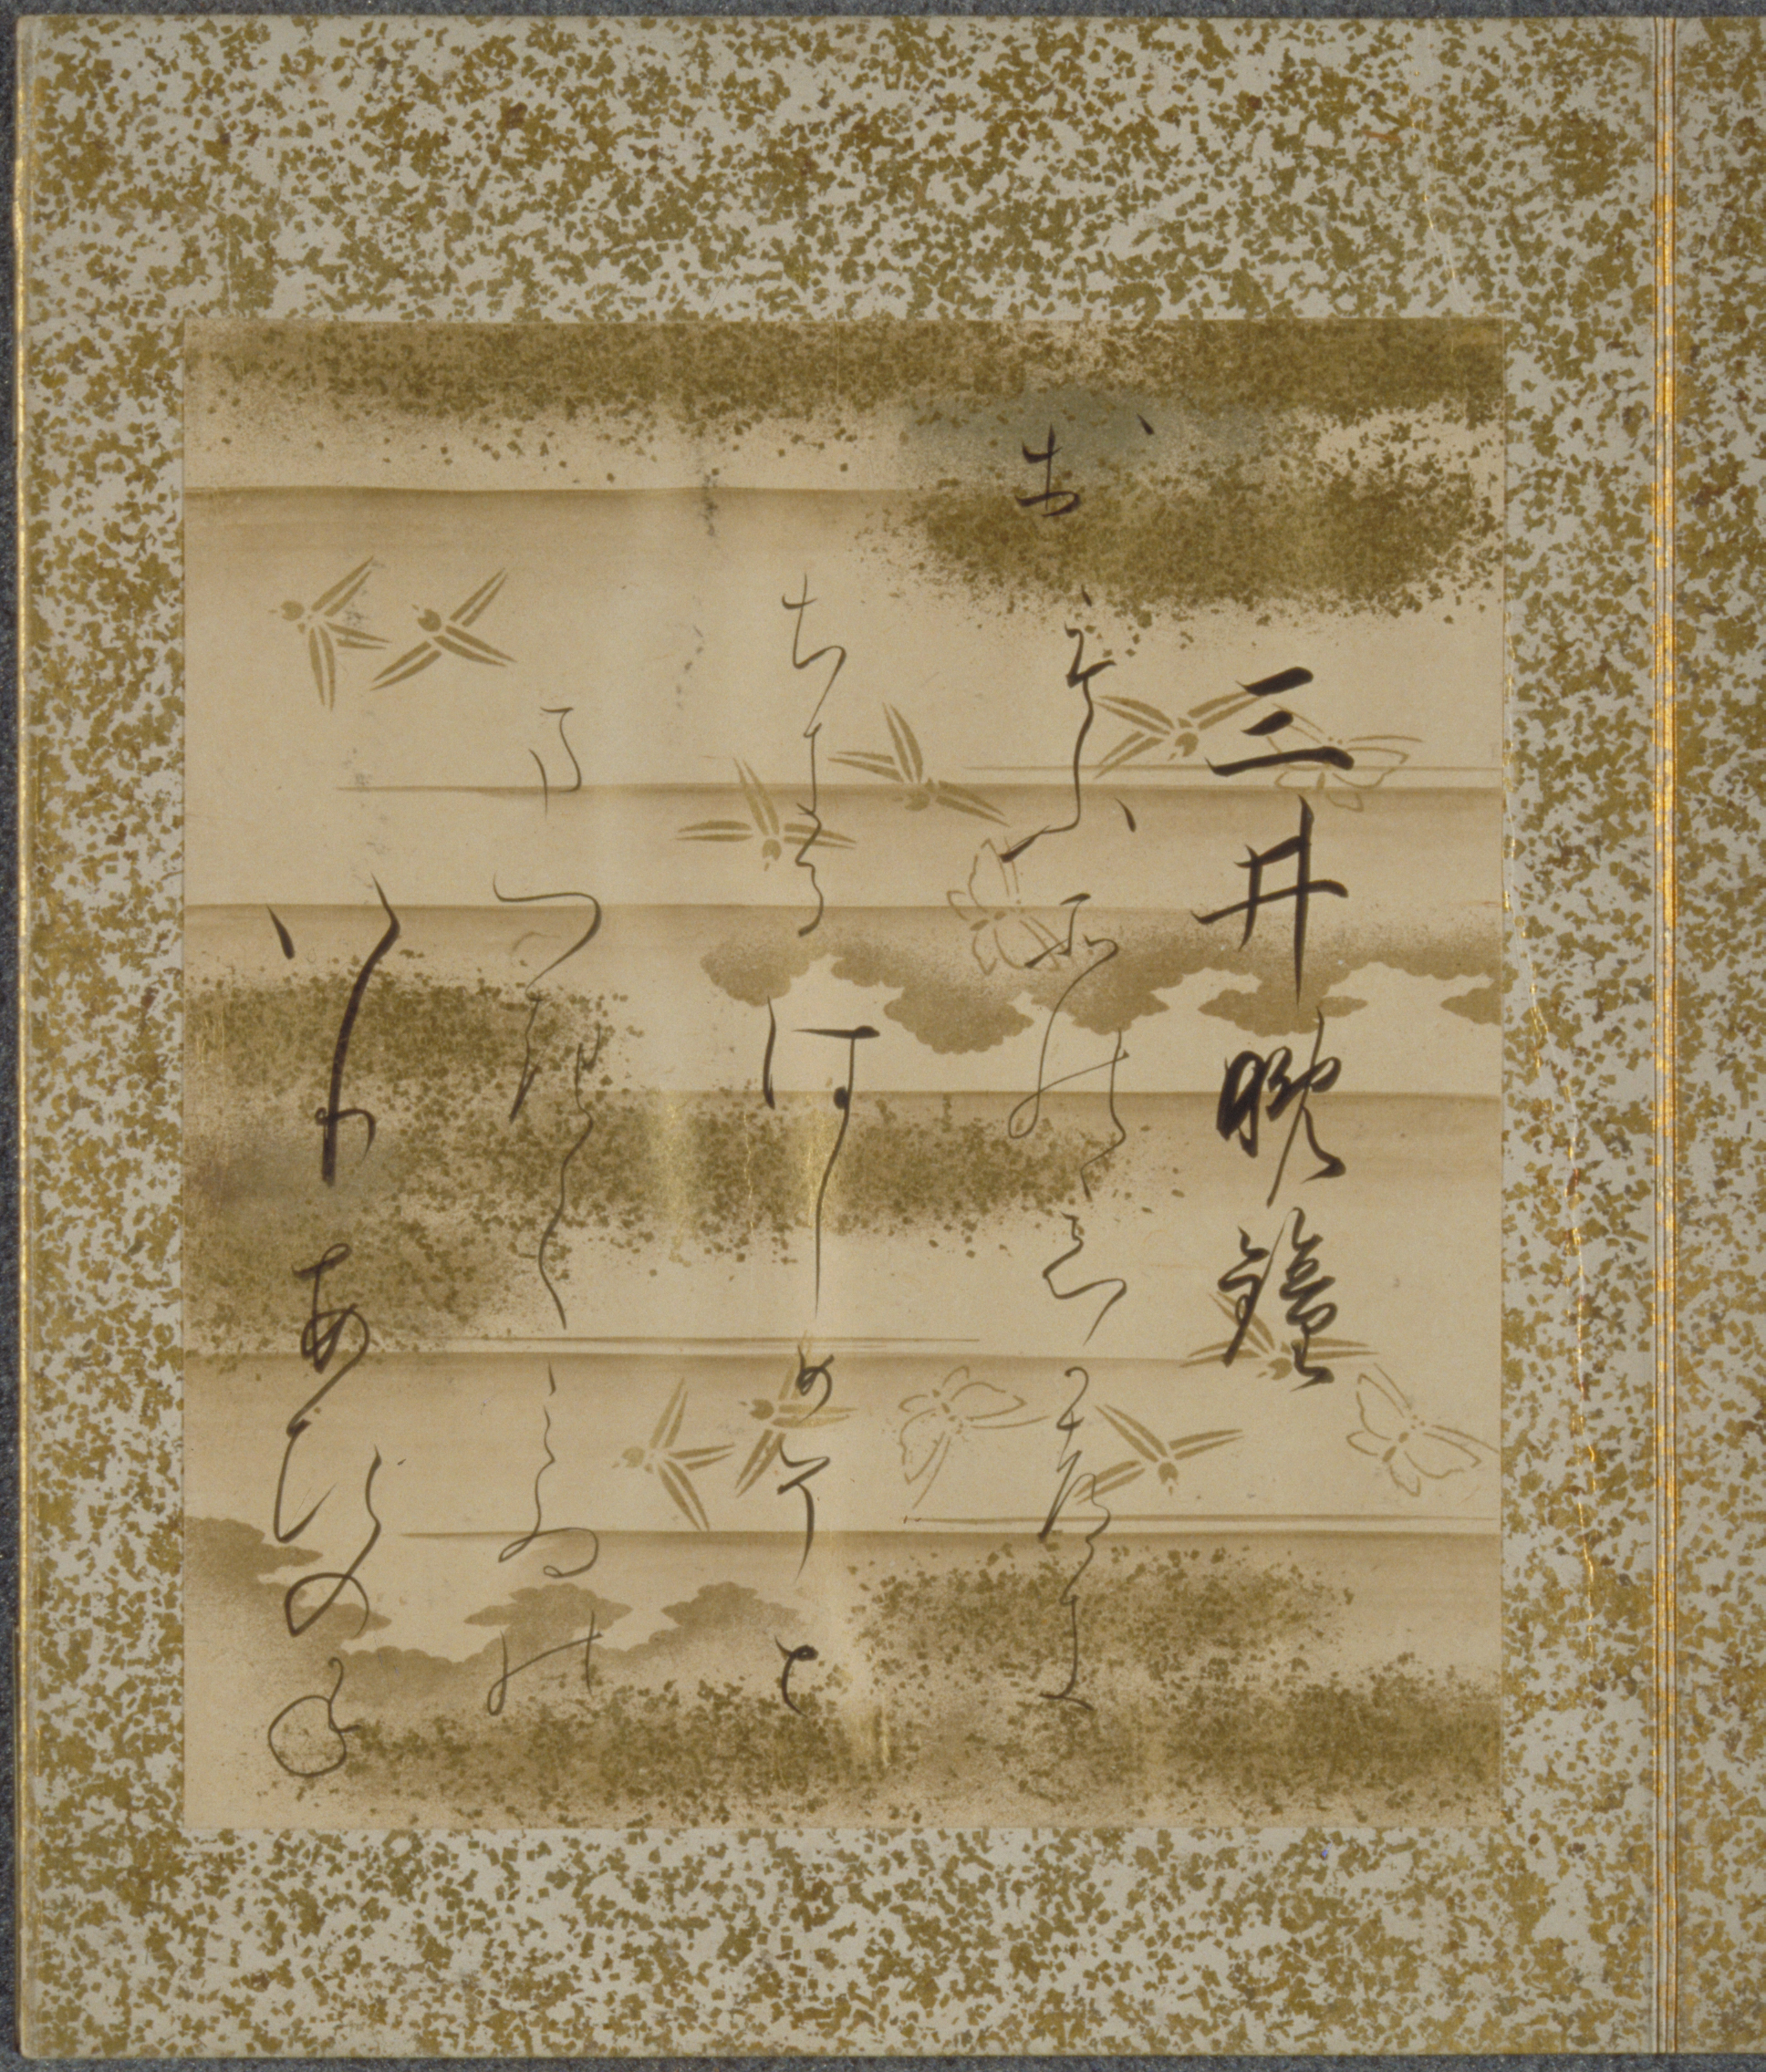 Five columns of Japanese characters on page with gold and cream flecked background.